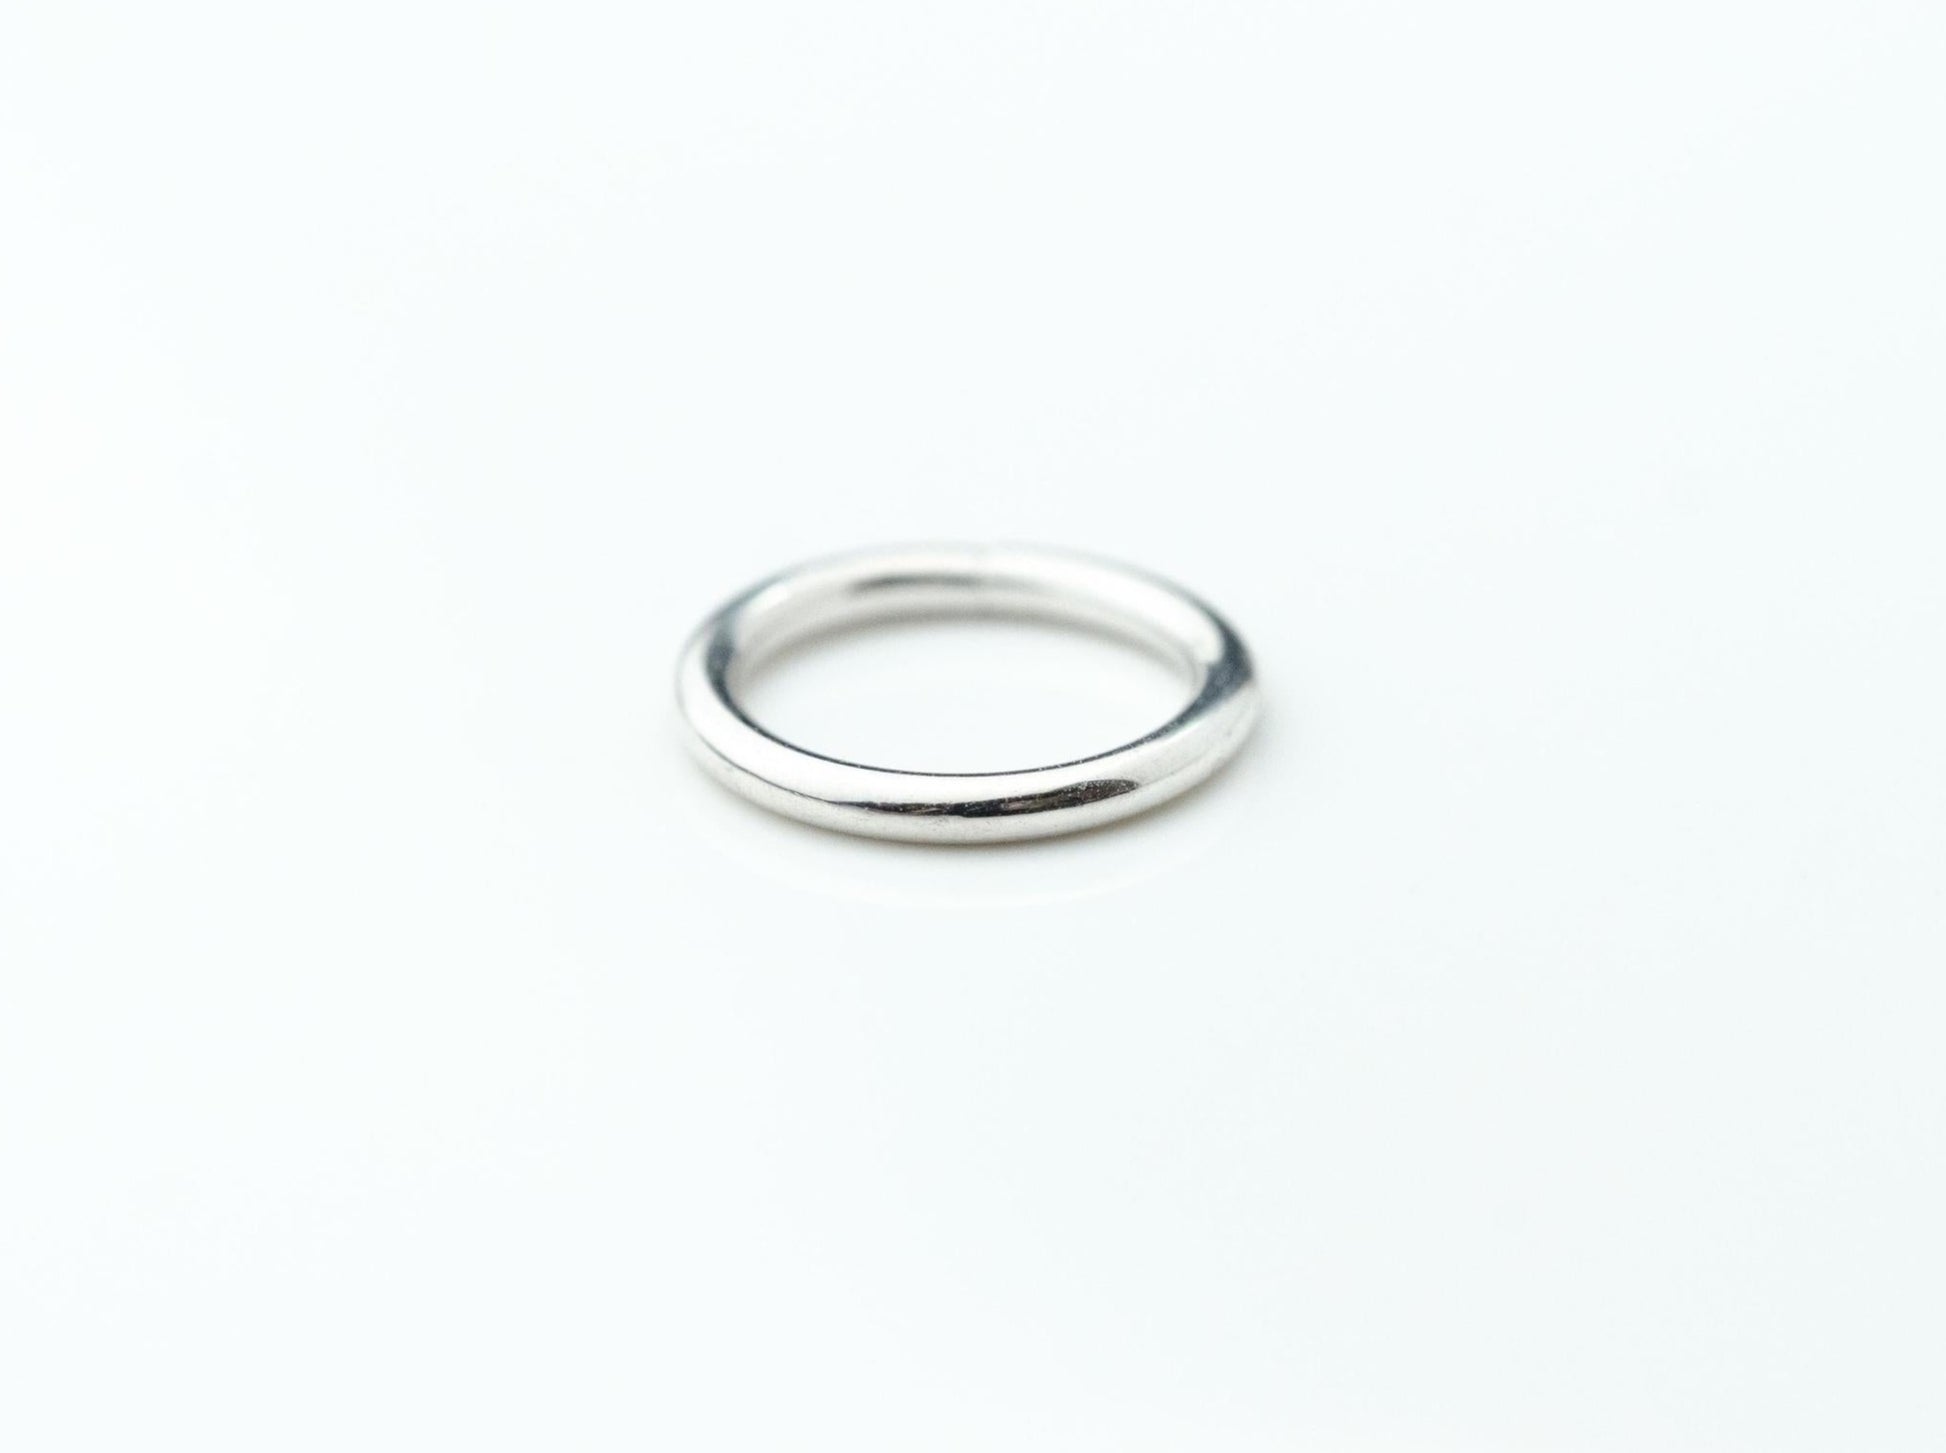 Seam Ring in 14k White Gold by BVLA